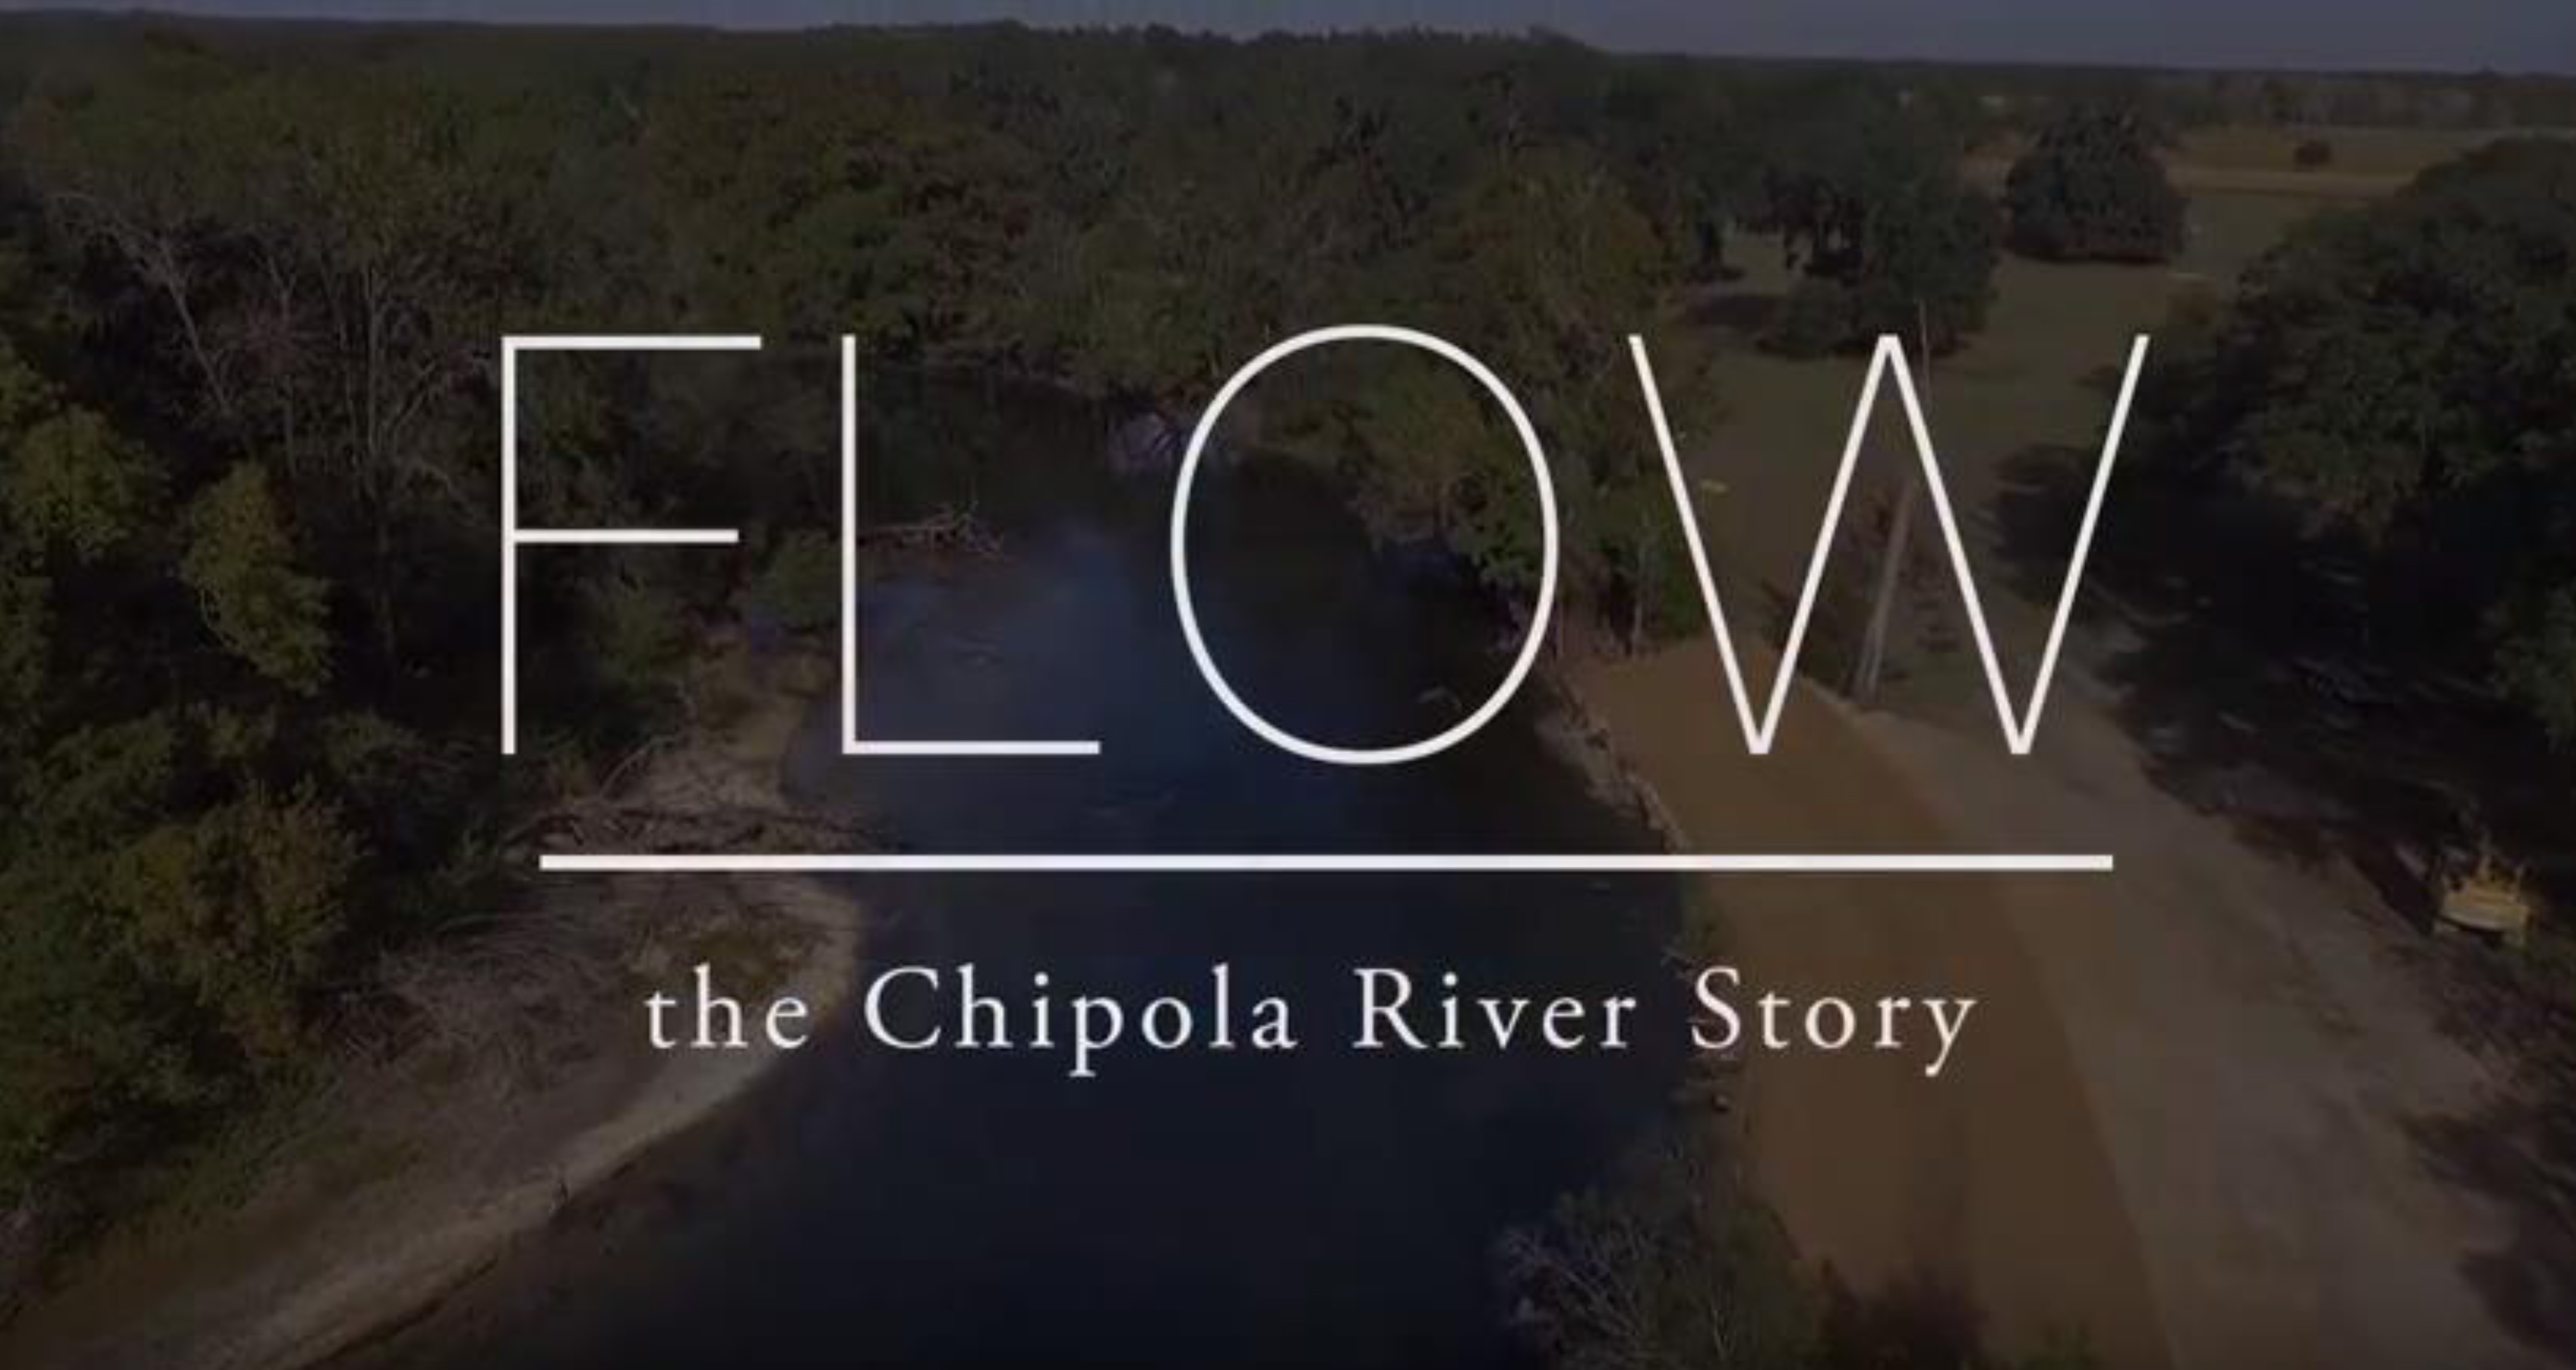 The Florida Fish & Wildlife Conservation Commission Highlights Chipola River in New Video